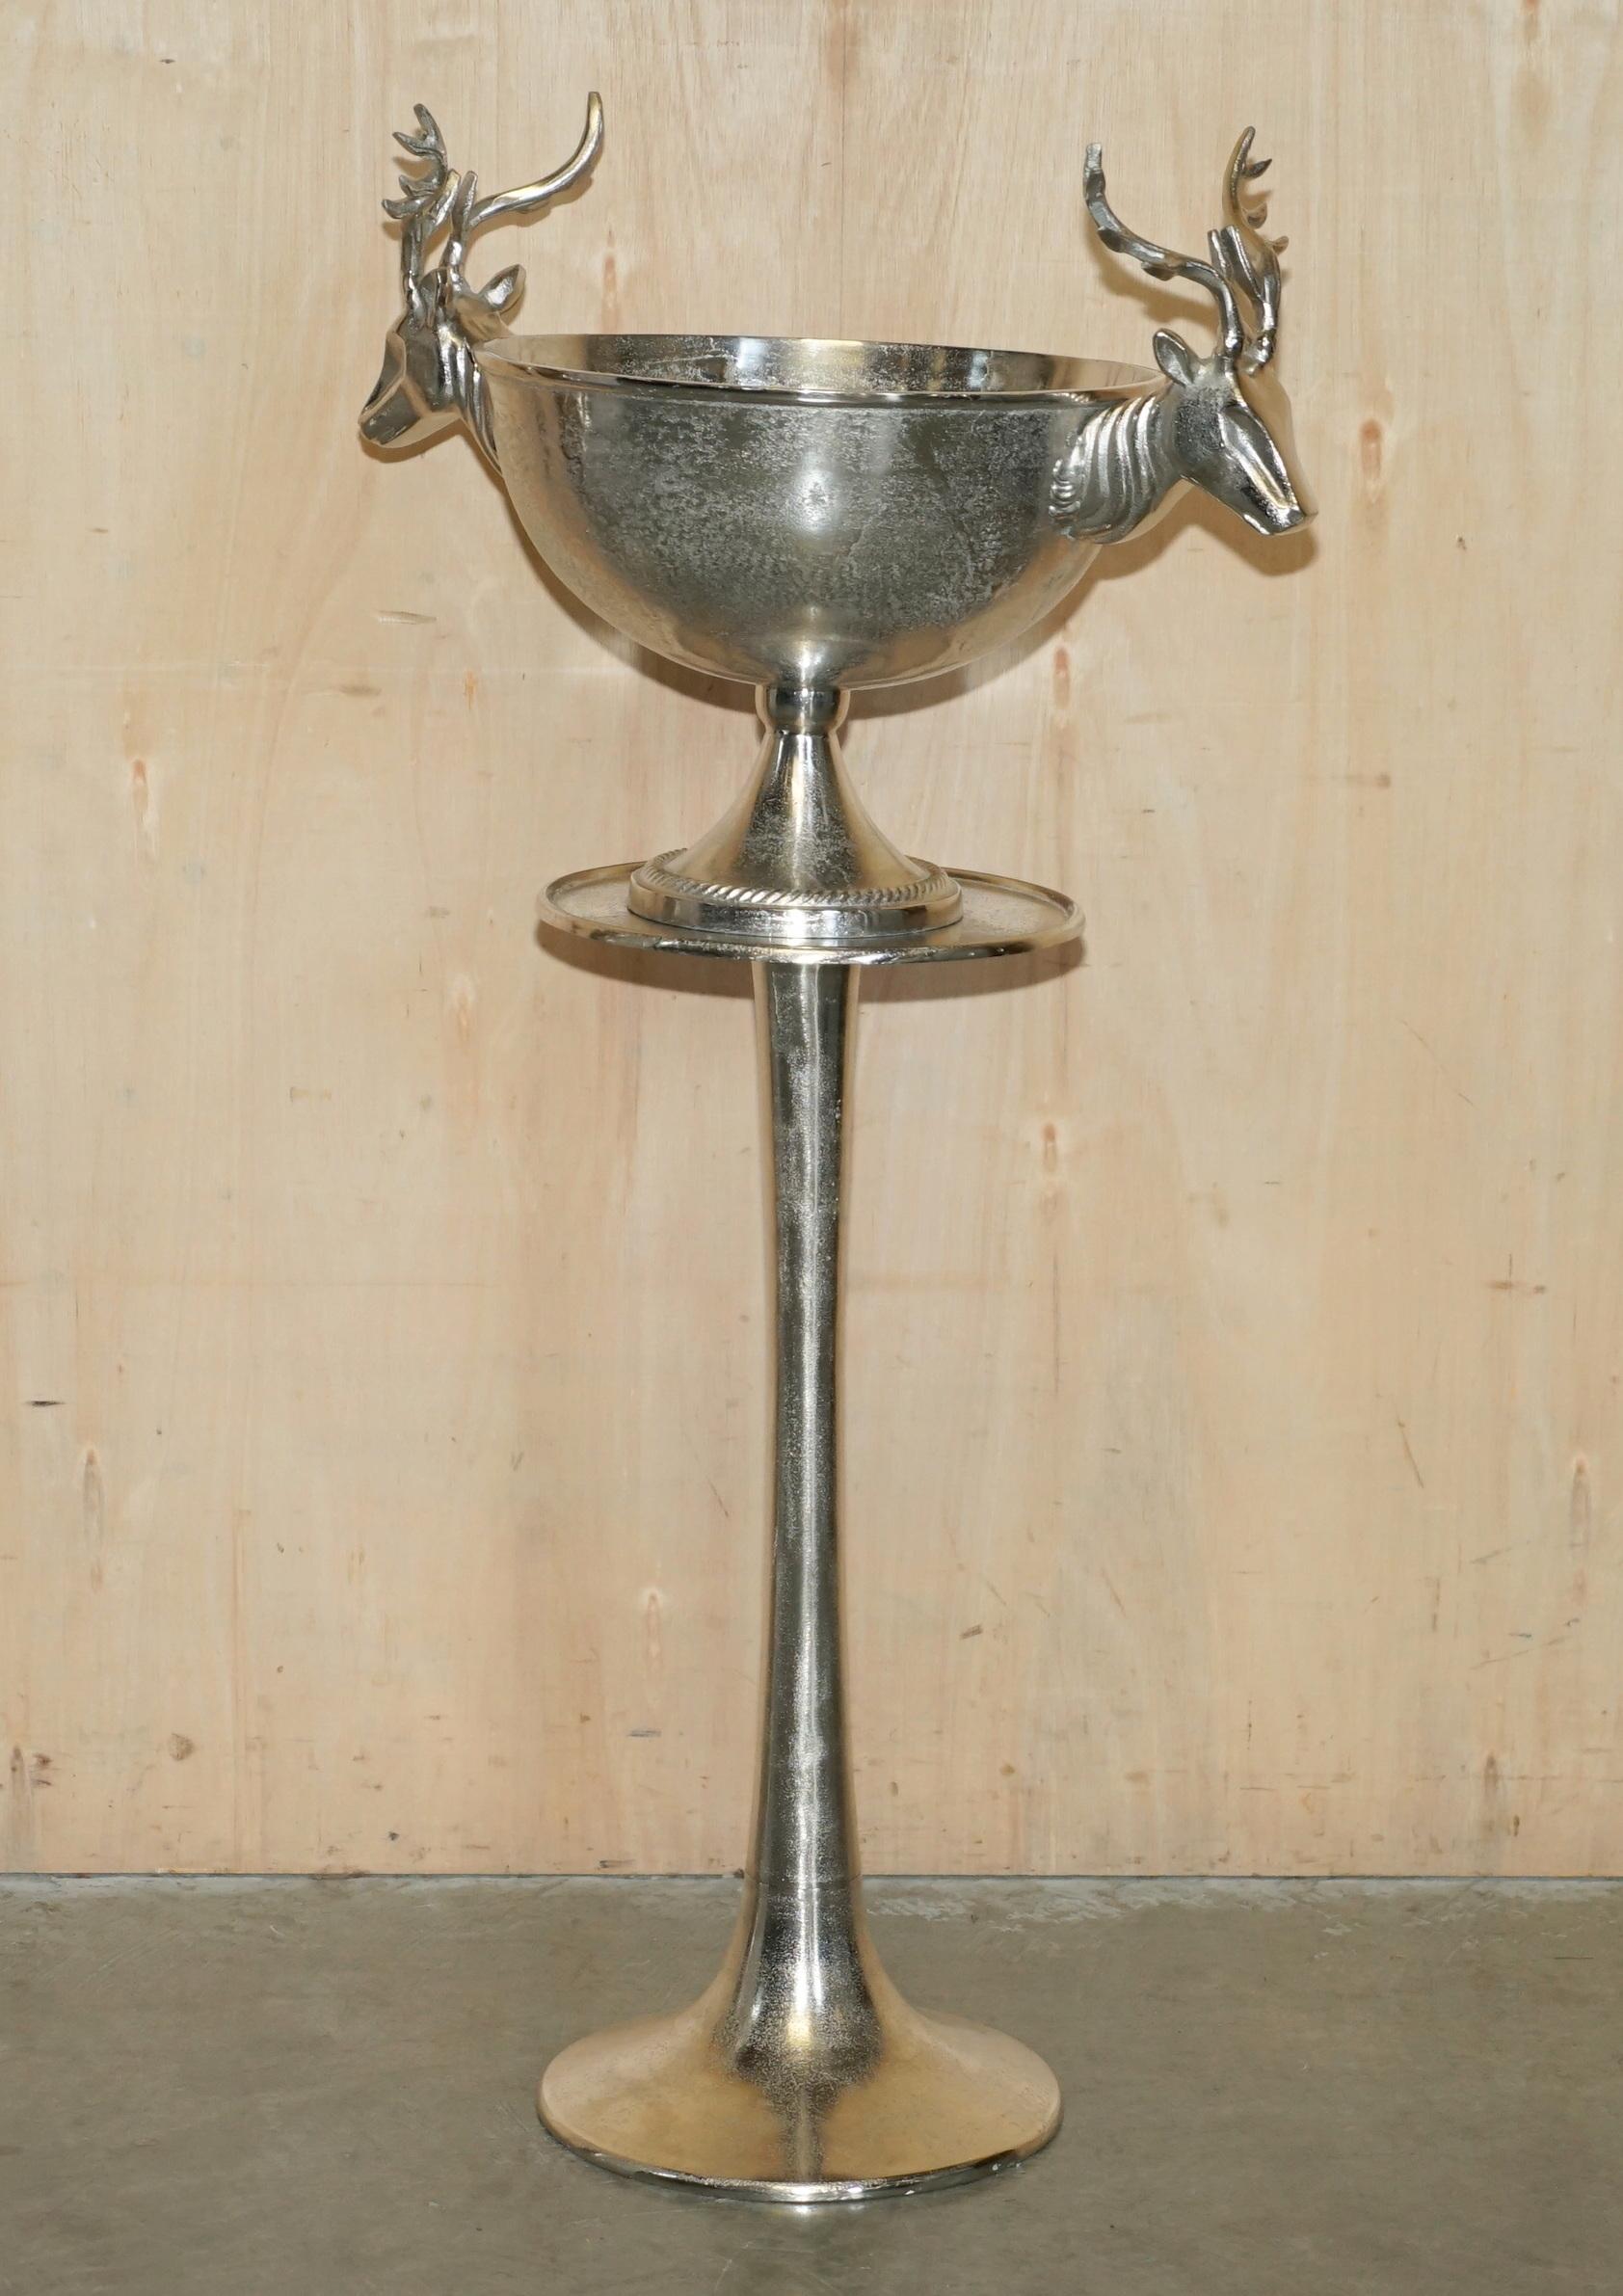 Royal House Antiques

Royal House Antiques is delighted to offer for sale this absolutely exquisite pair of extra large white metal Stag or Reindeer Champagne buckets on the original side tables 

Please note the delivery fee listed is just a guide,